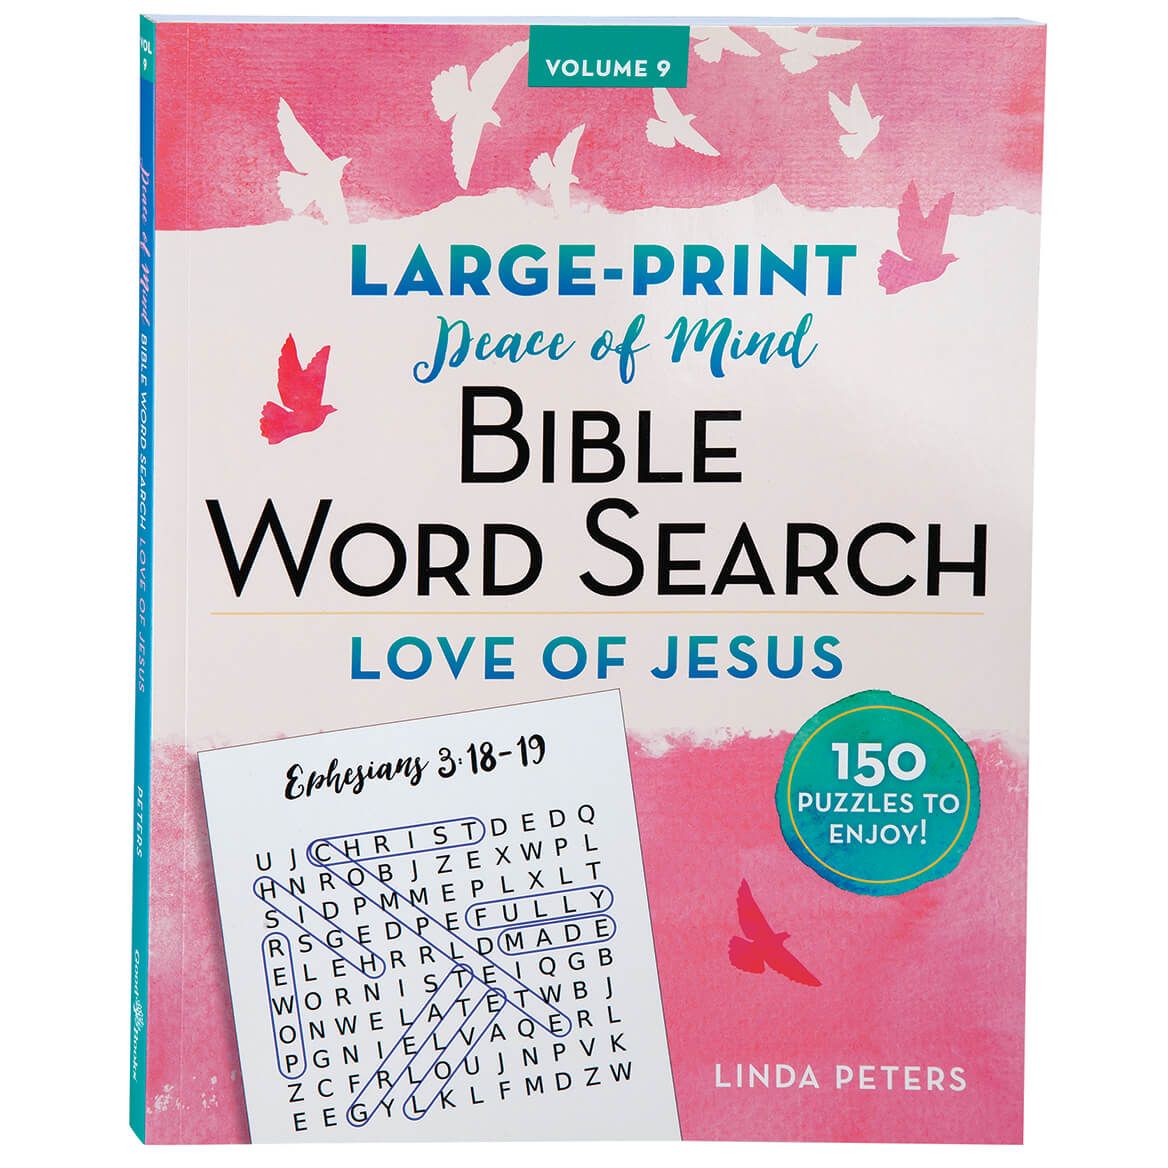 Peace of Mind Bible Word Search, Love of Jesus + '-' + 375652